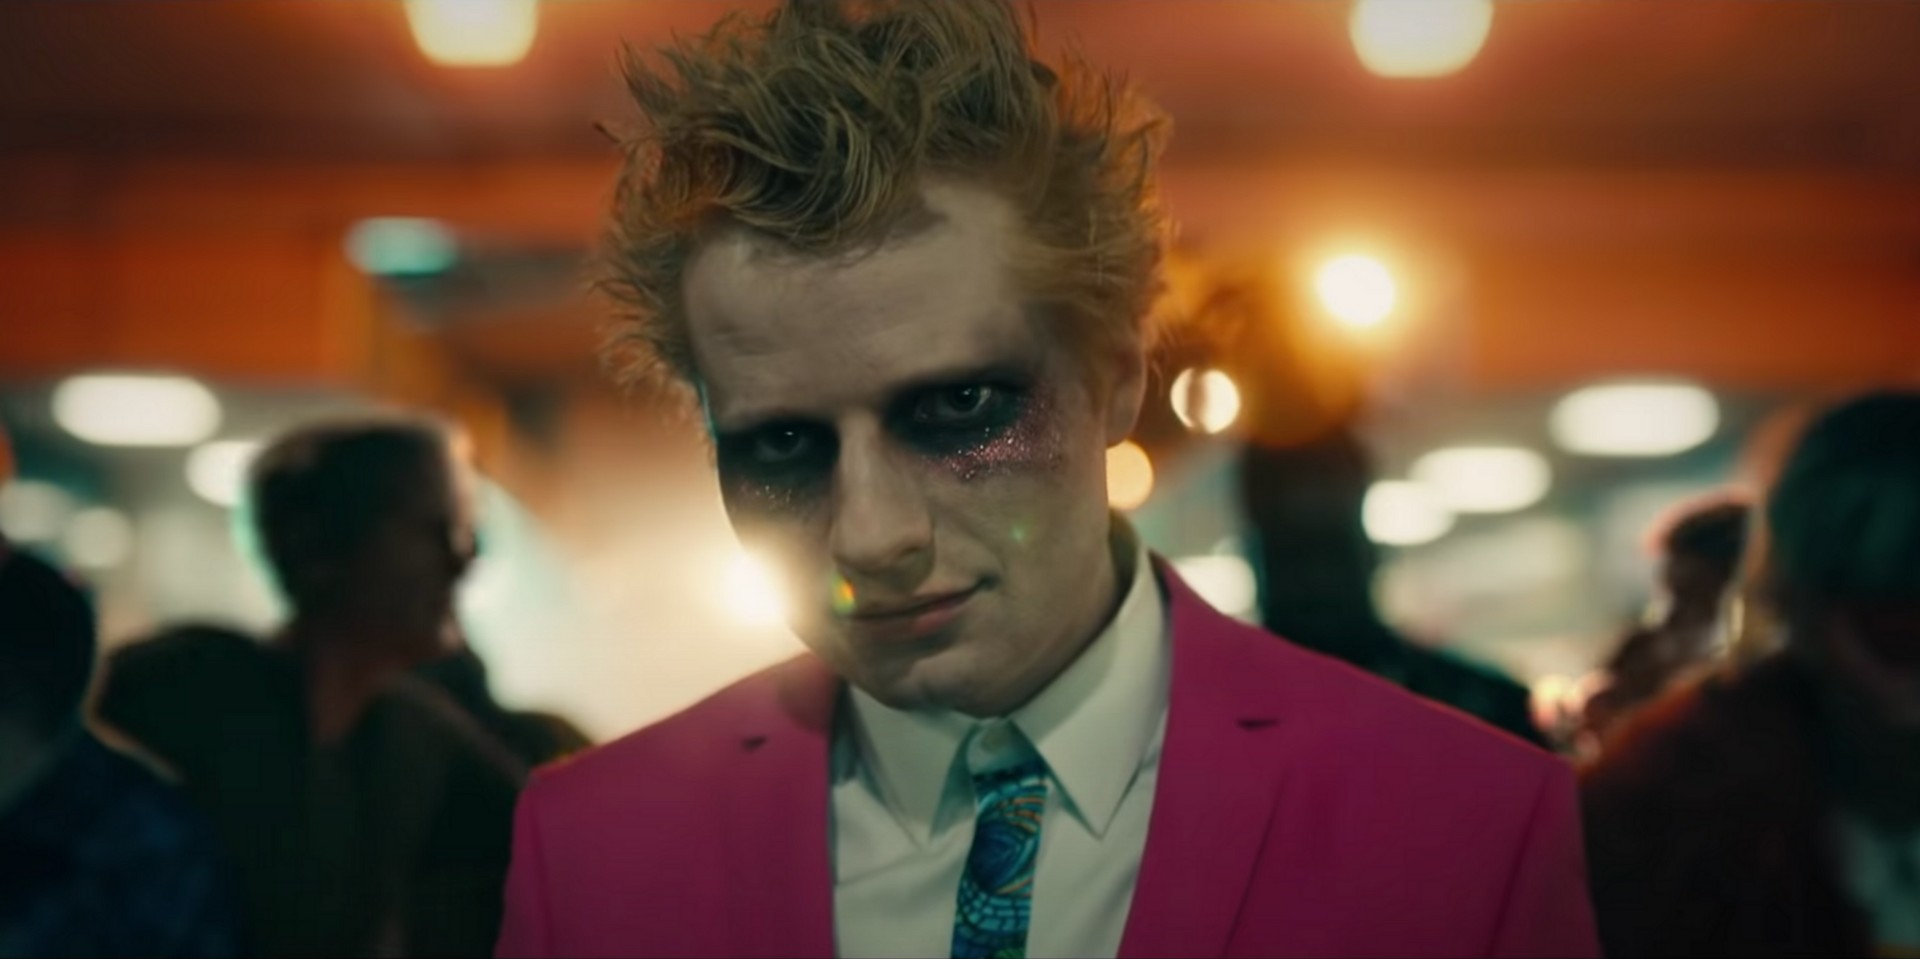 Ed Sheeran is back as a vampire with his new single ‘Bad Habits’ - watch